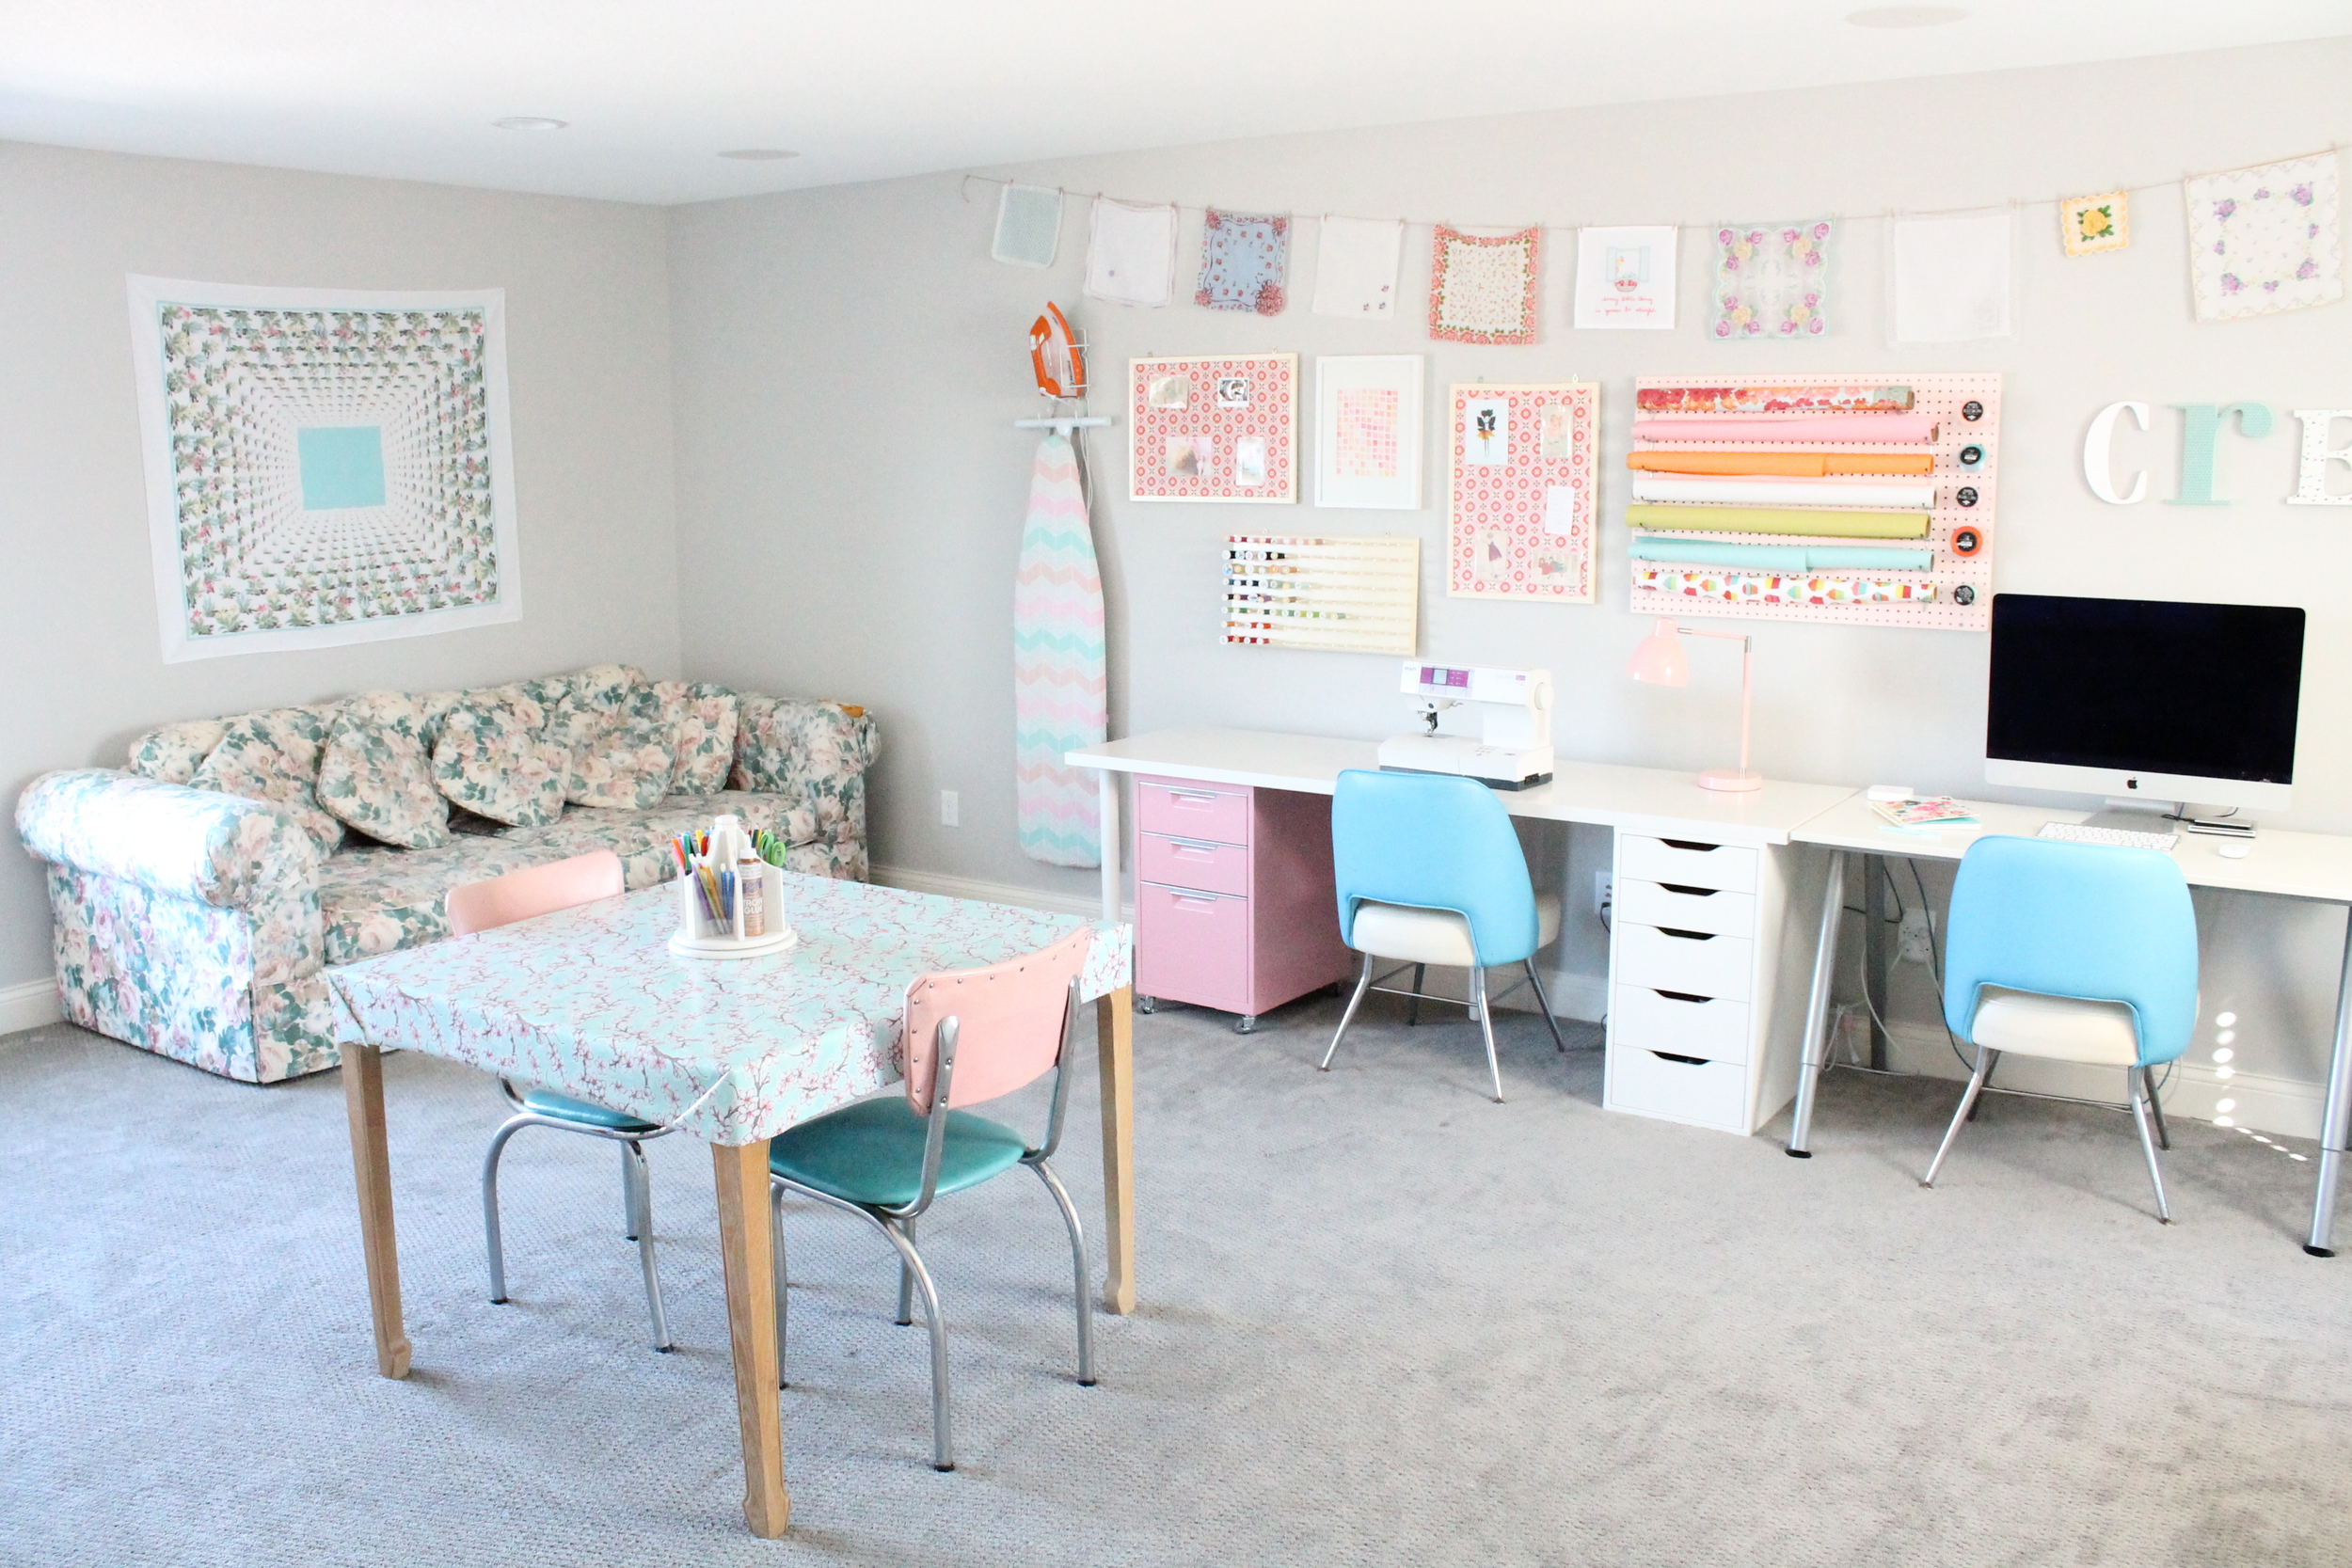 Family Craft Studio. Love how everyone in the family can share this creative space. A perfect craft room for sewing, scrapbooking or just hanging out and reading.